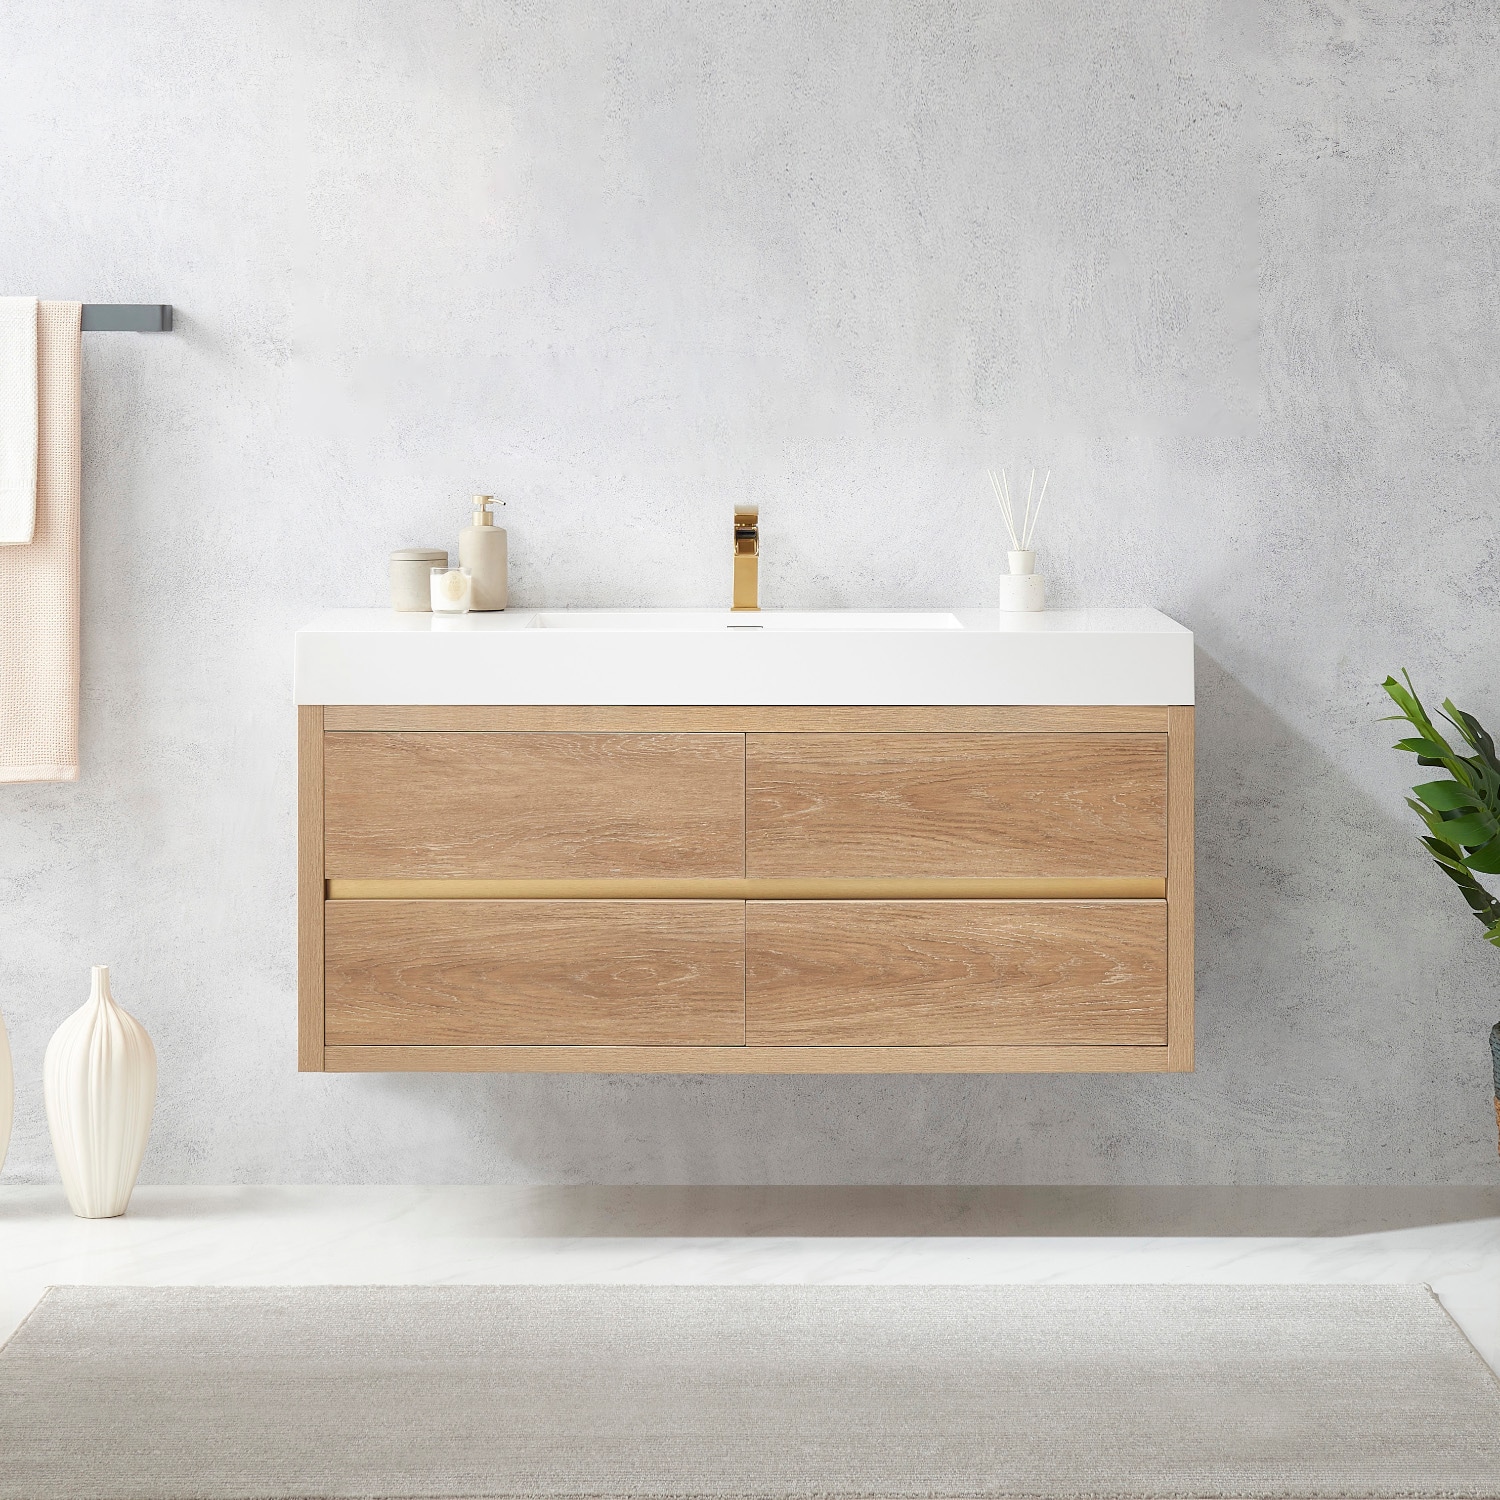 Palencia 48-in North American Oak Finish Single Sink Floating Bathroom Vanity with White Engineered Stone Top in Brown | - Vinnova 703148-NO-WH-NM